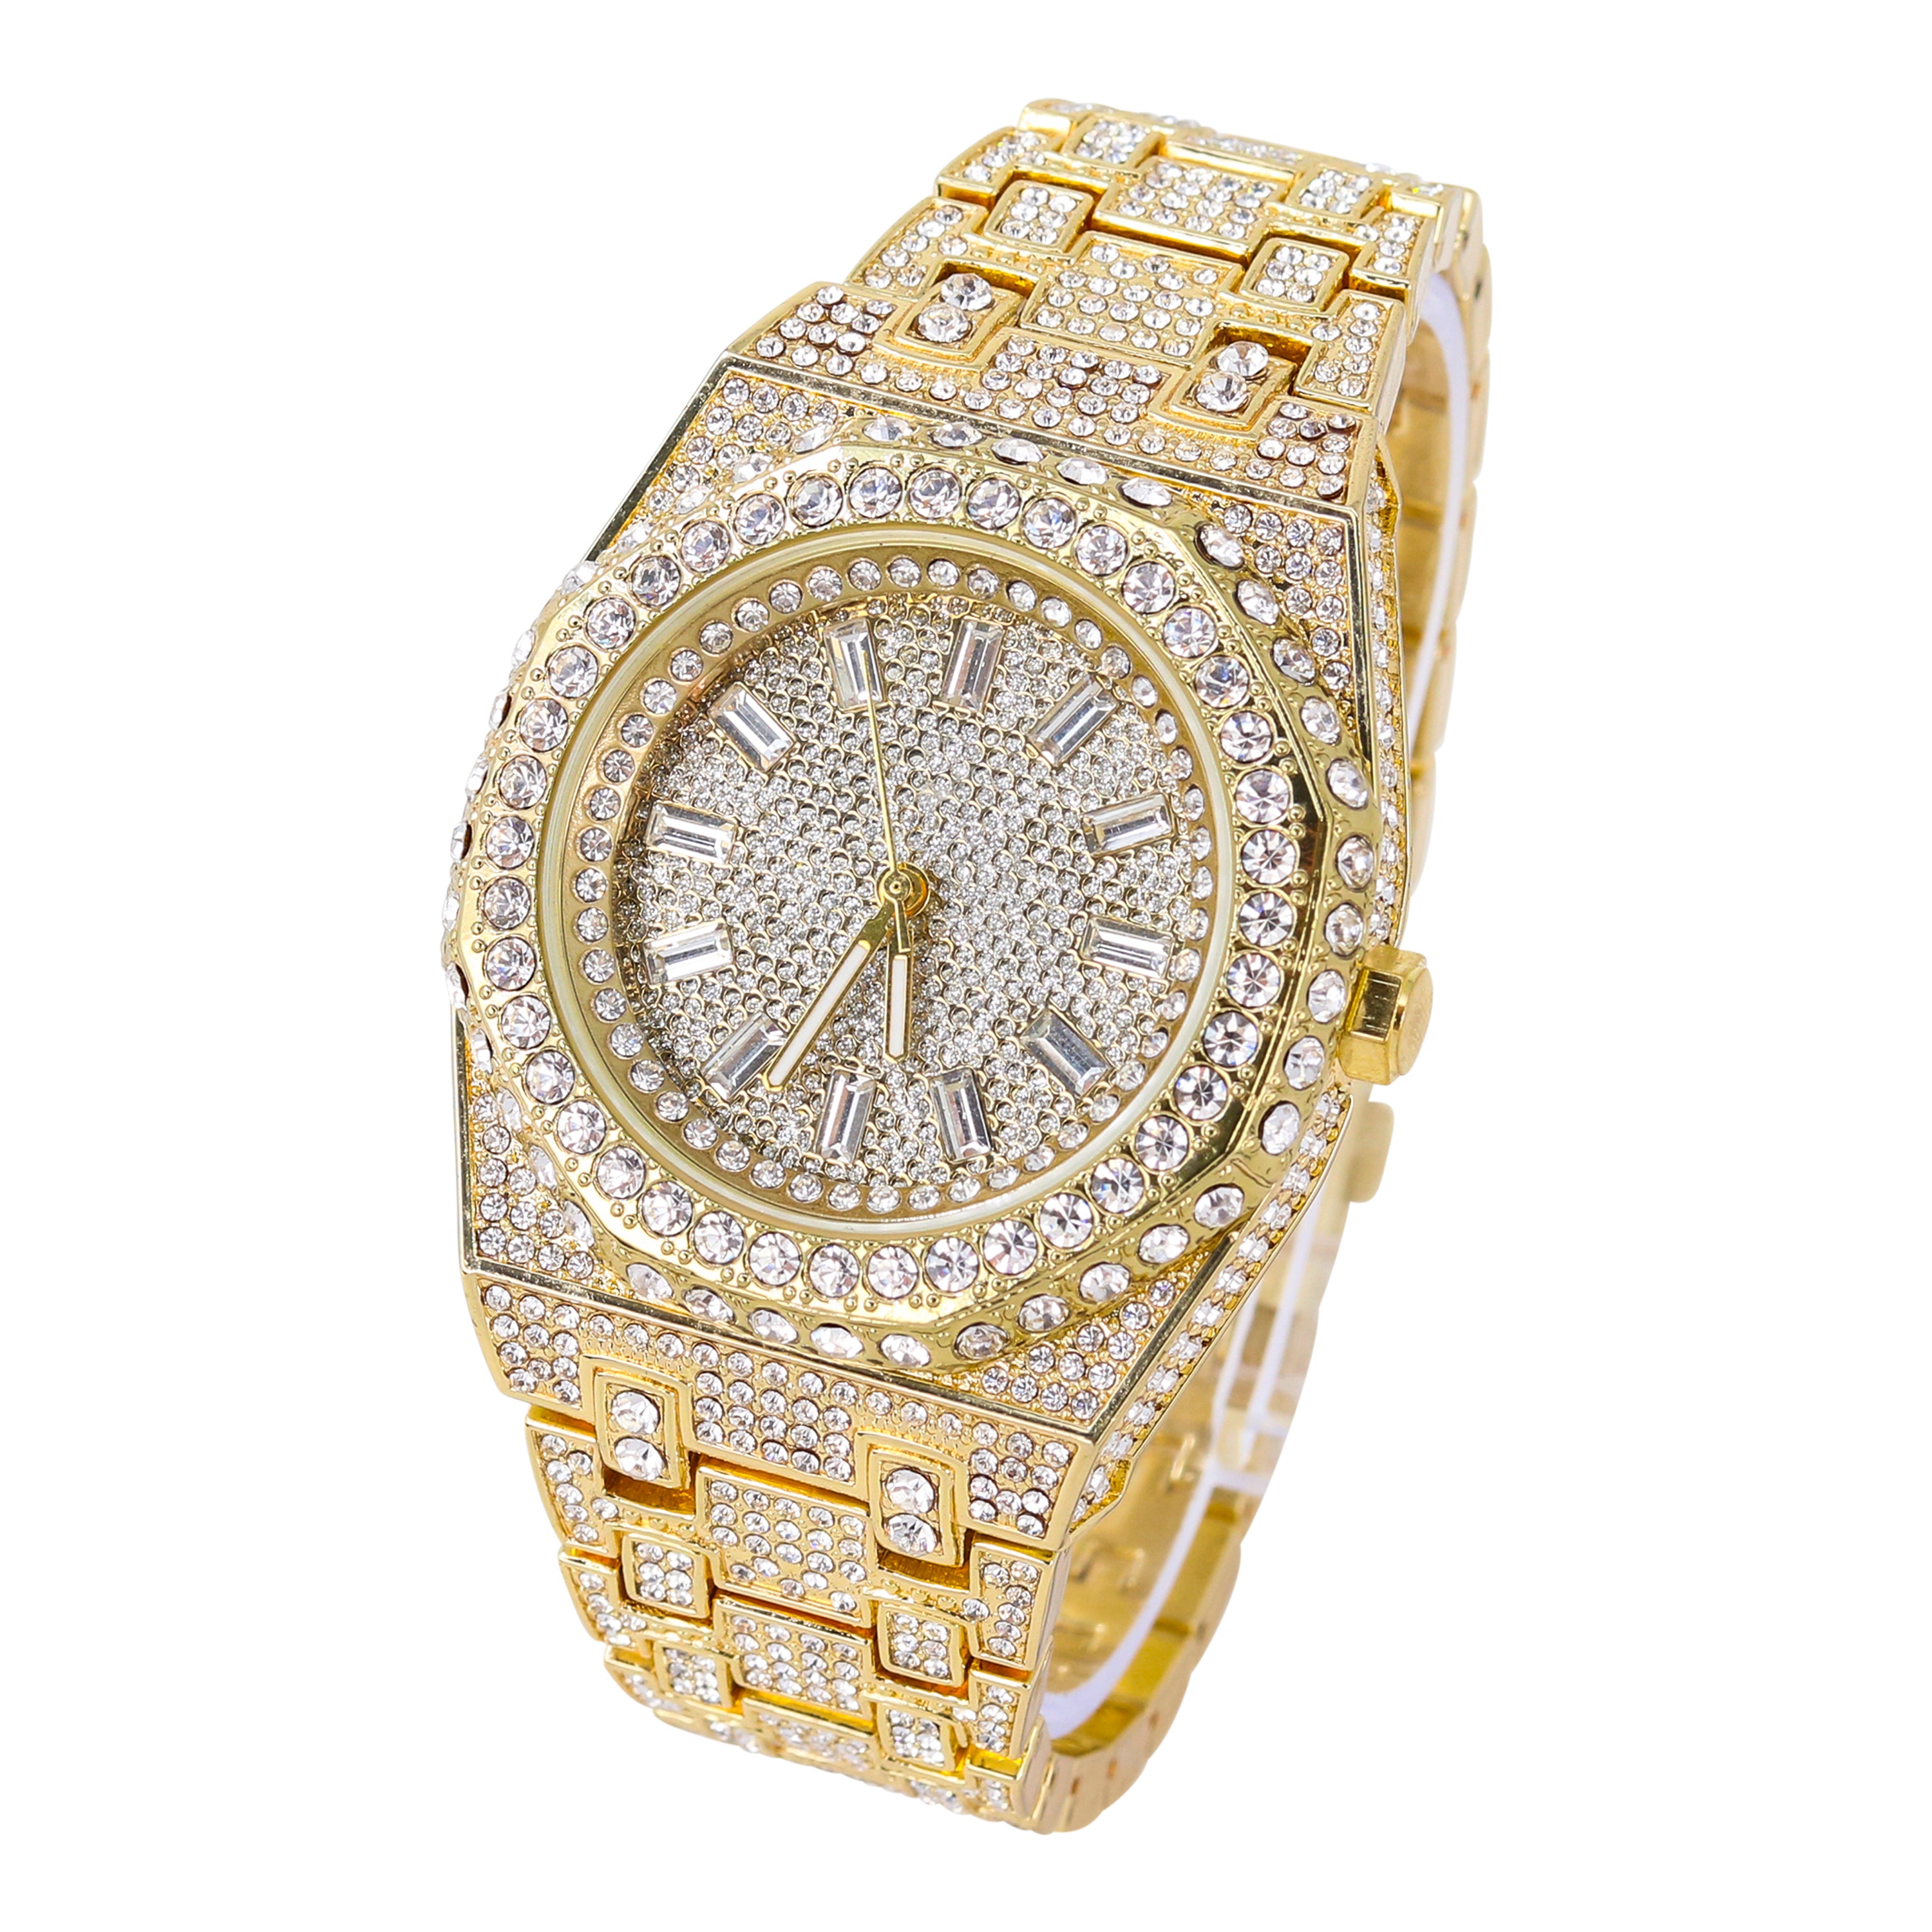 Men's Round Baguette Dial Watch 43mm Gold - "Fully Iced Band"